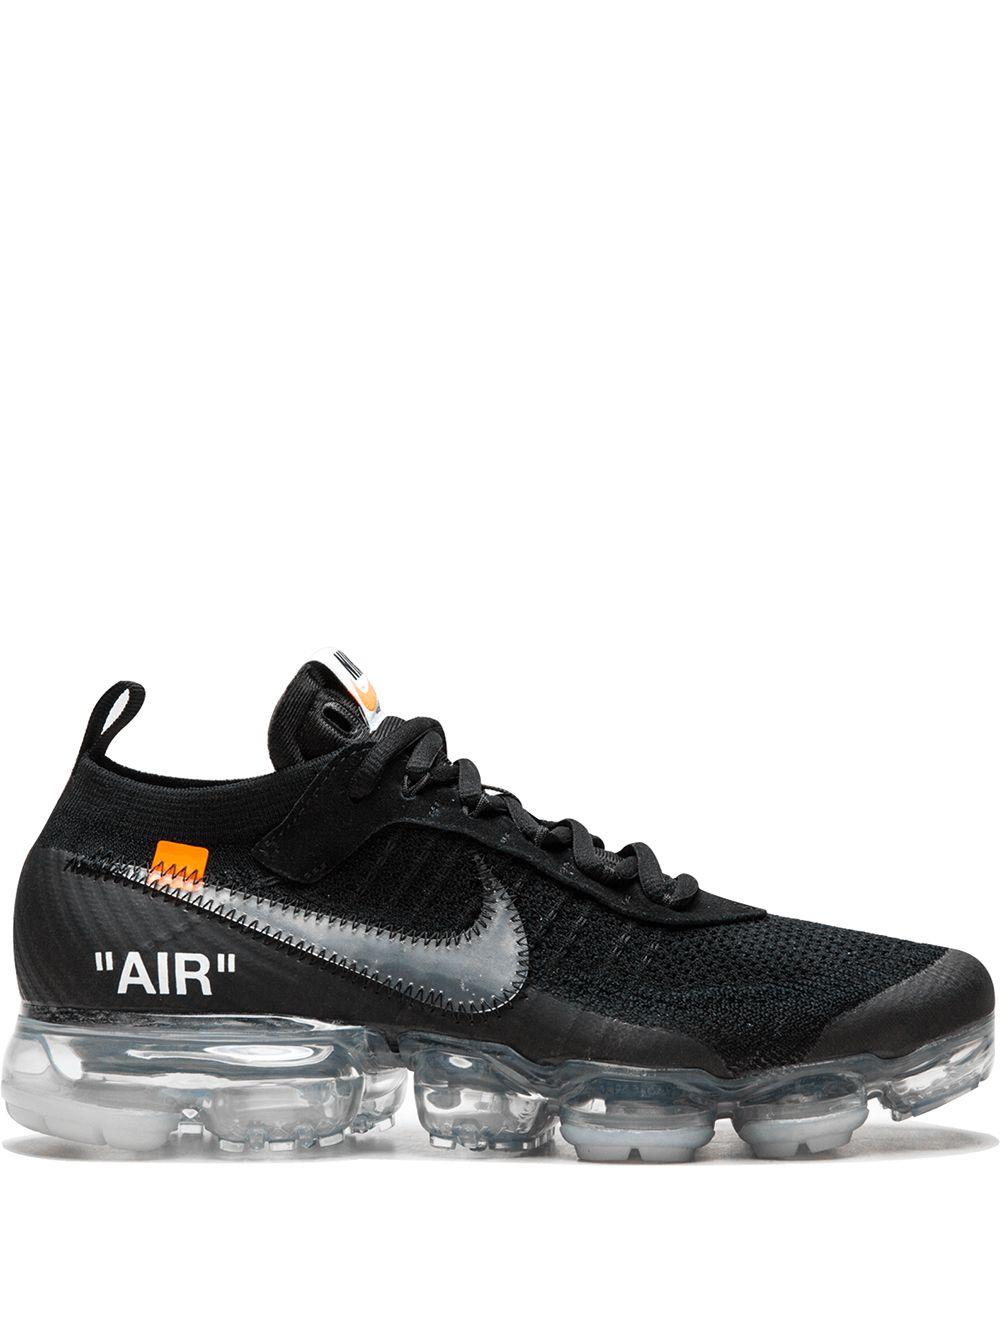 NIKE X OFF-WHITE Rubber Vapormax Fk in Black - Save 14% - Lyst